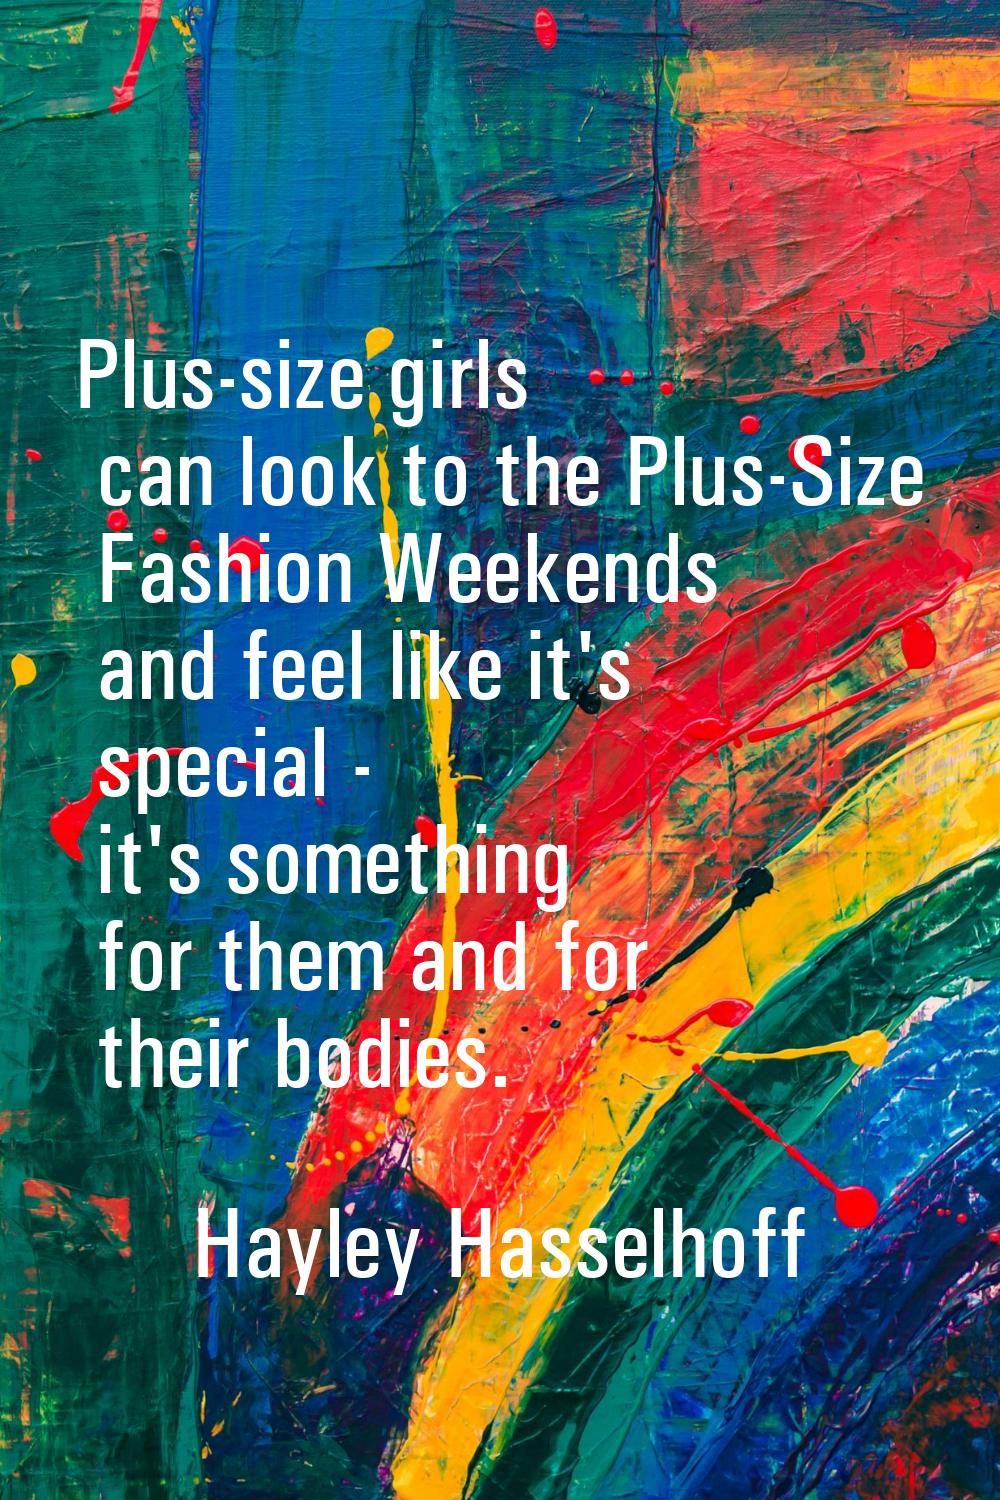 Plus-size girls can look to the Plus-Size Fashion Weekends and feel like it's special - it's someth